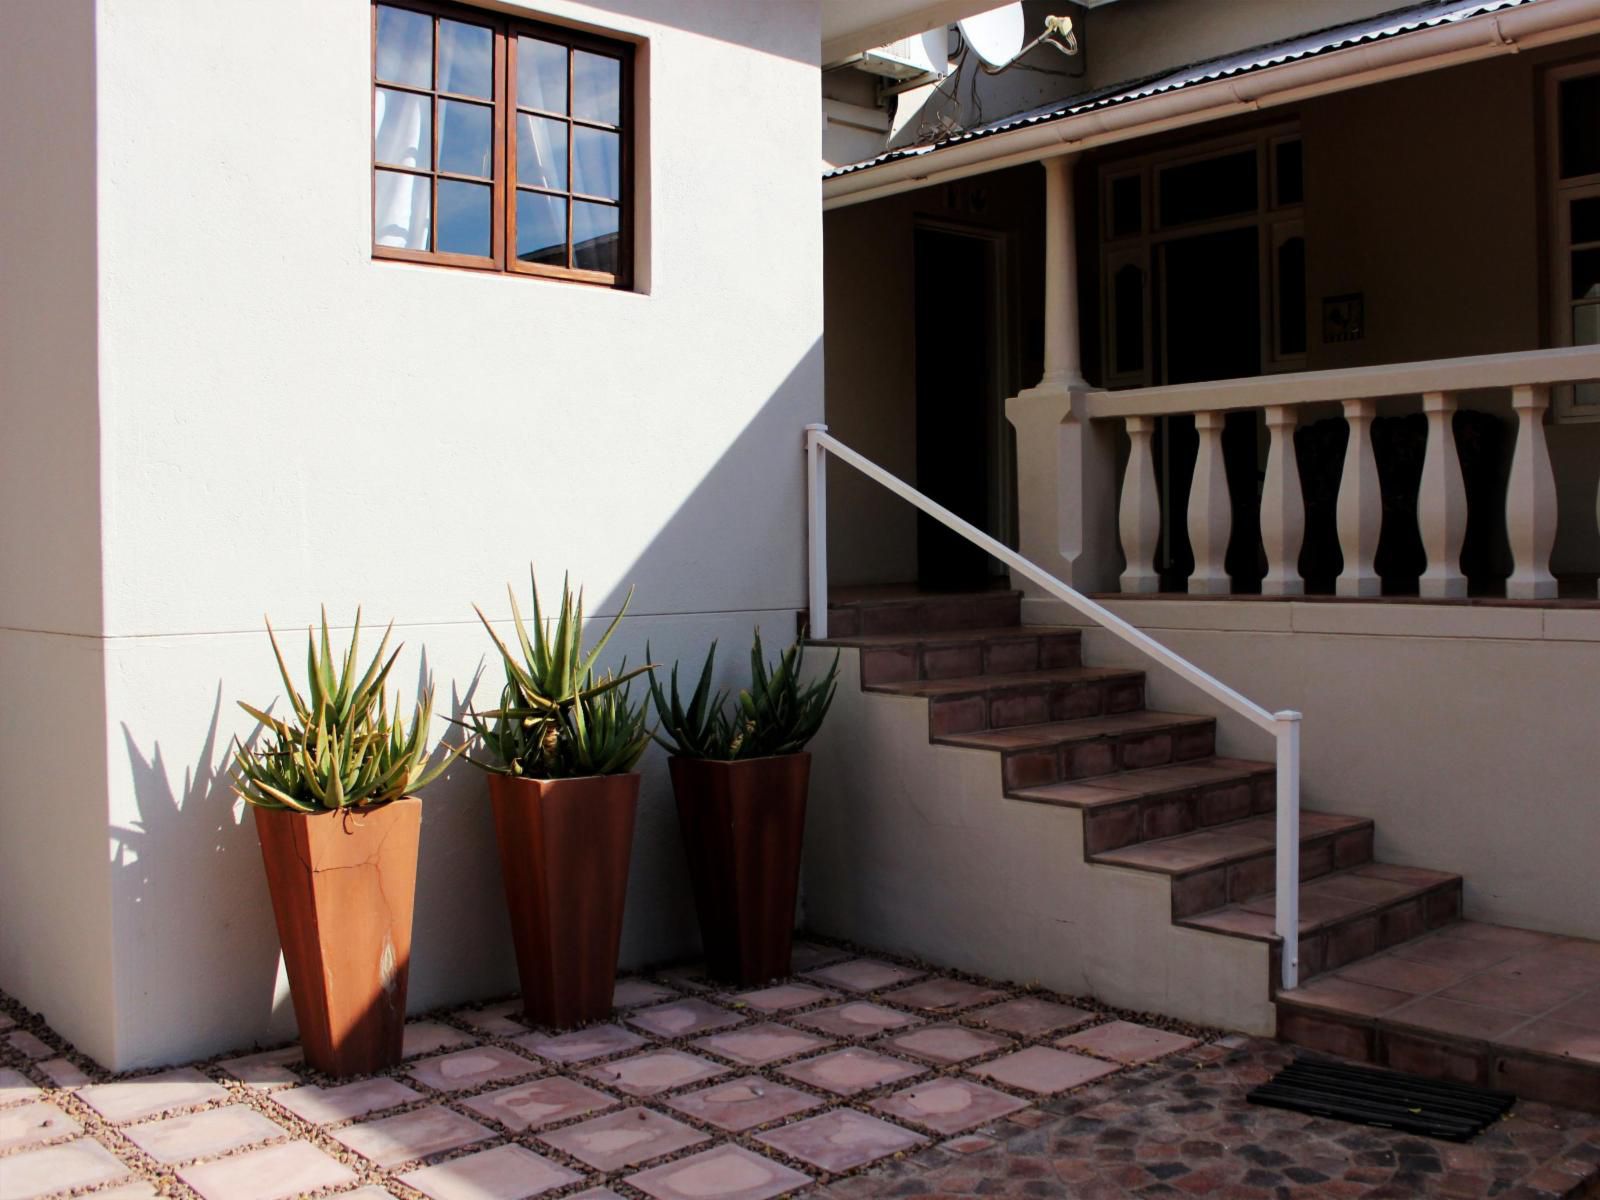 Alimento Guest House Upington Northern Cape South Africa House, Building, Architecture